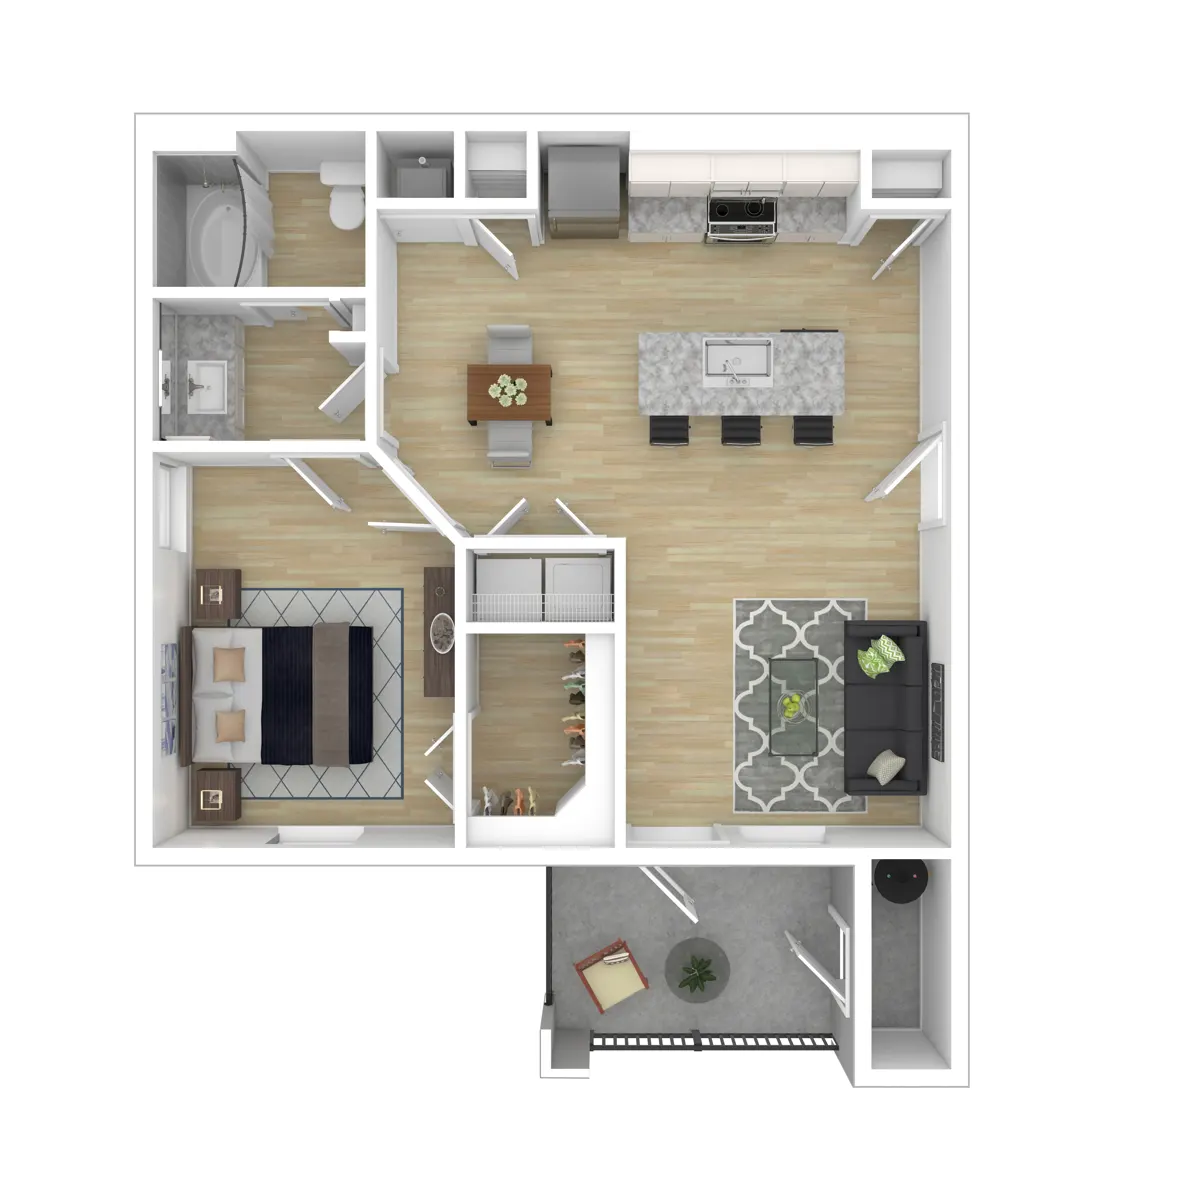 The Verge at Summer Park Rise apartments Houston Floor plan 5